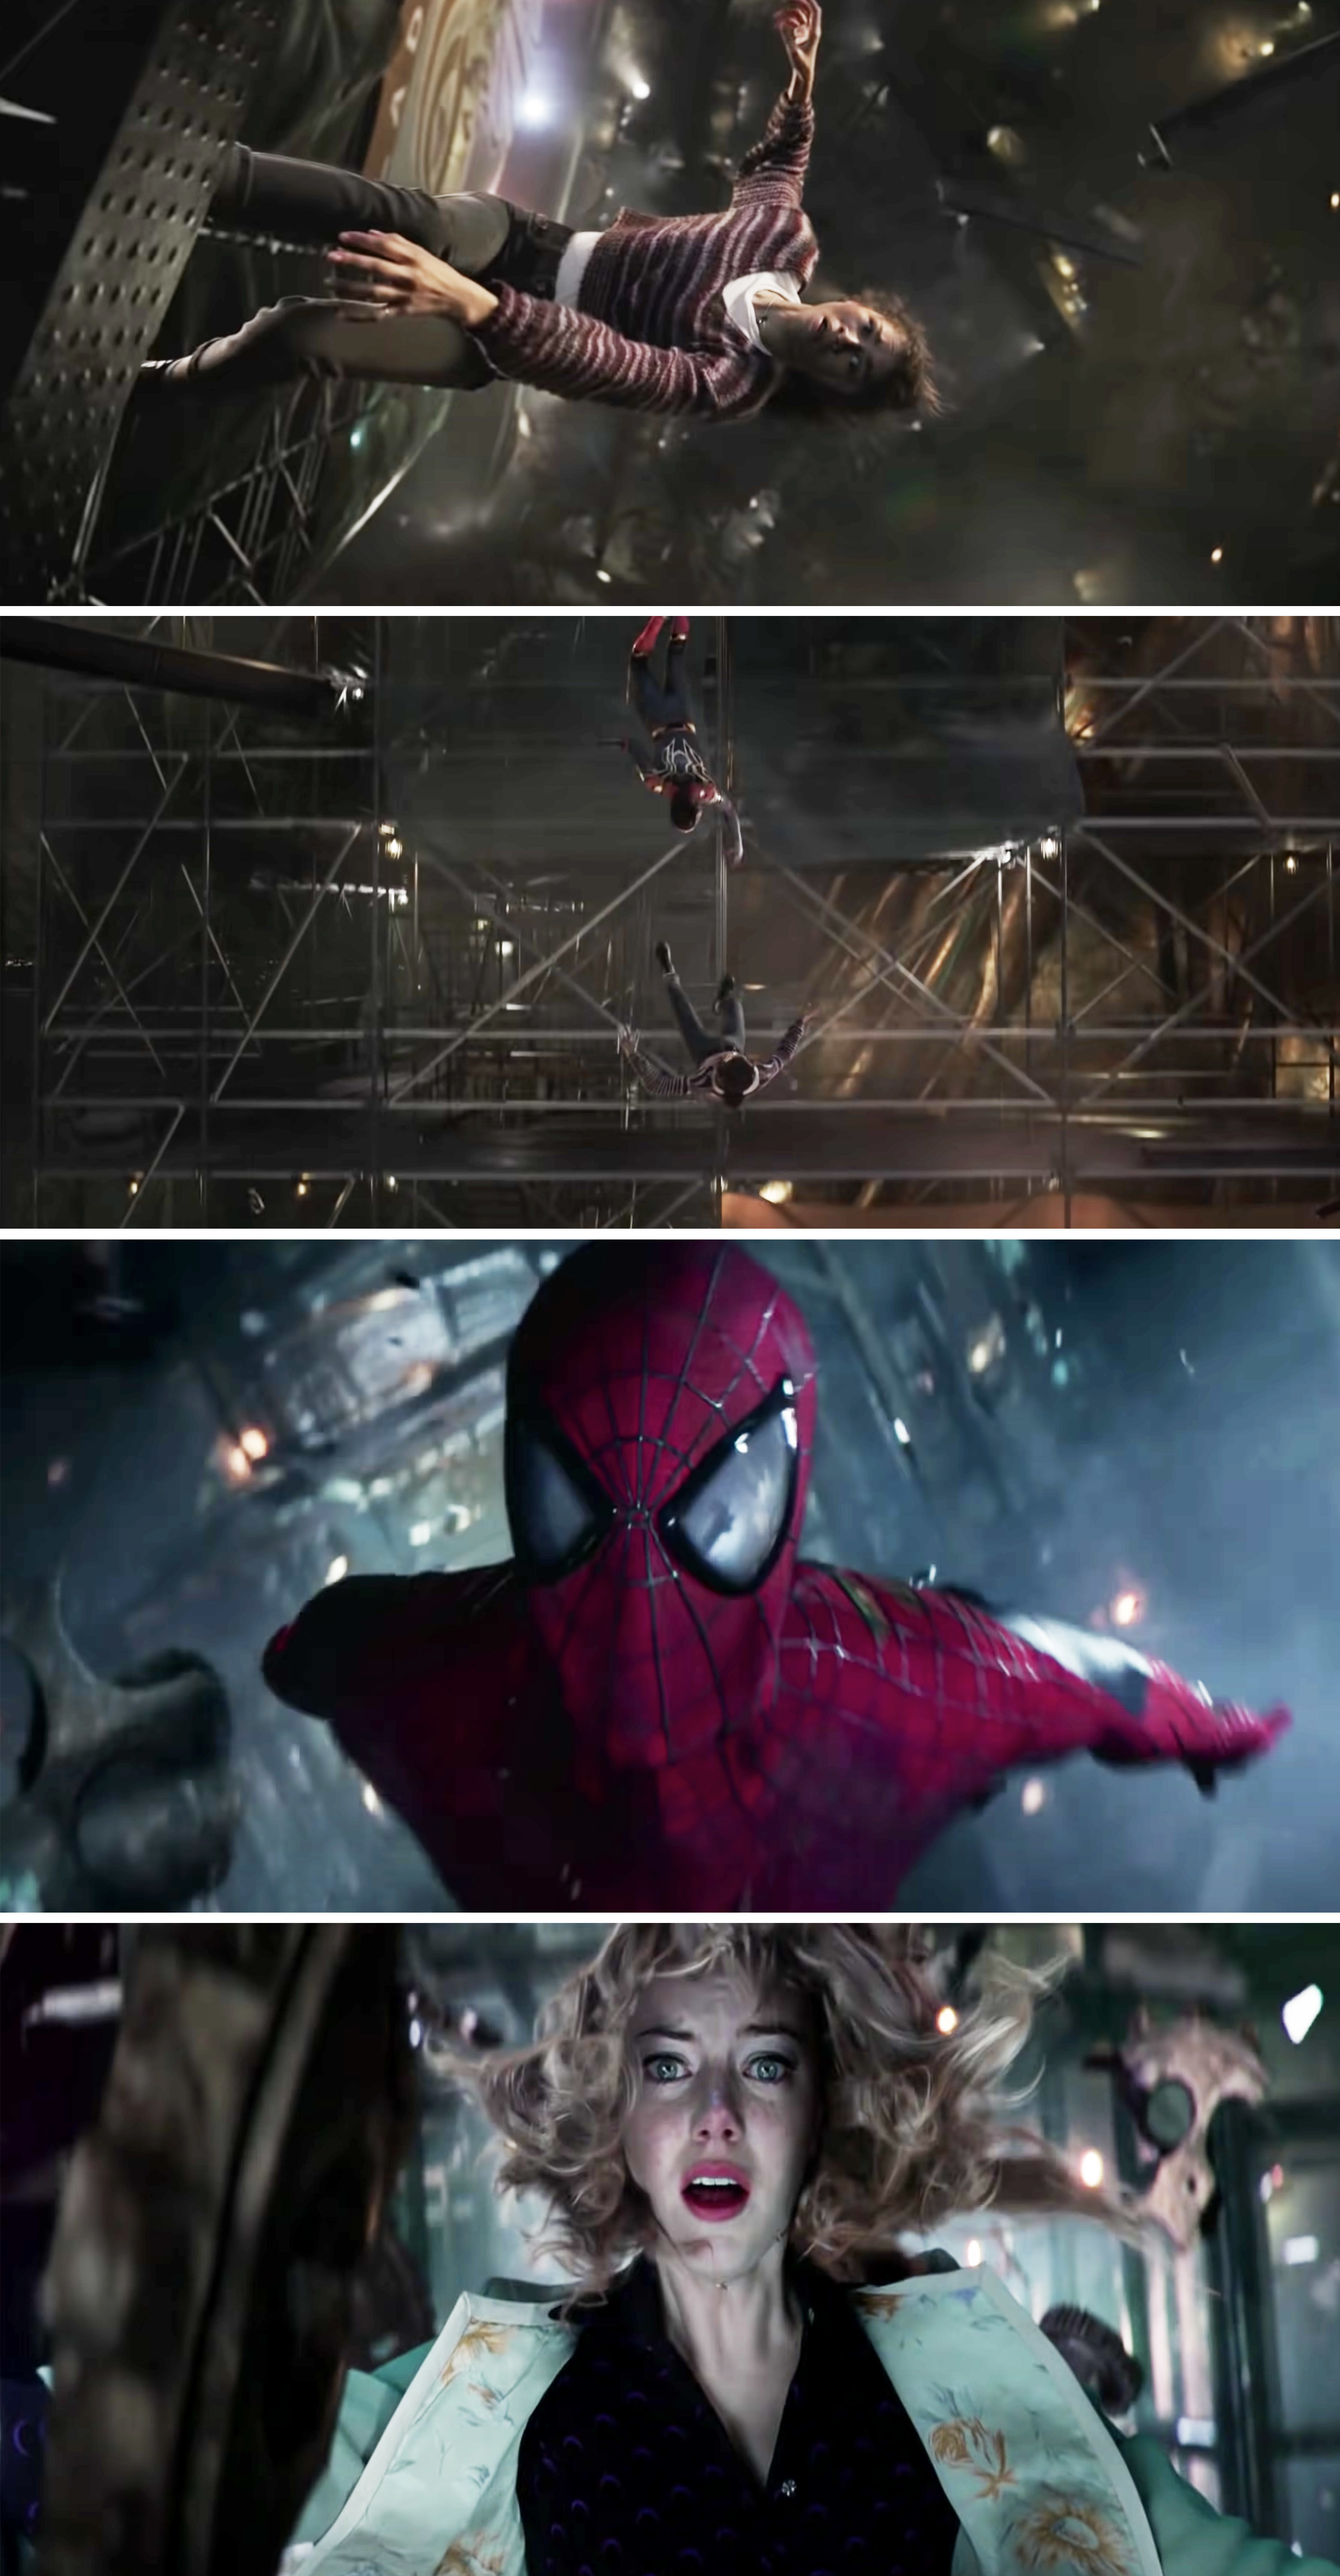 MJ falling in No Way Home vs. Gwen falling in The Amazing Spider-Man 2